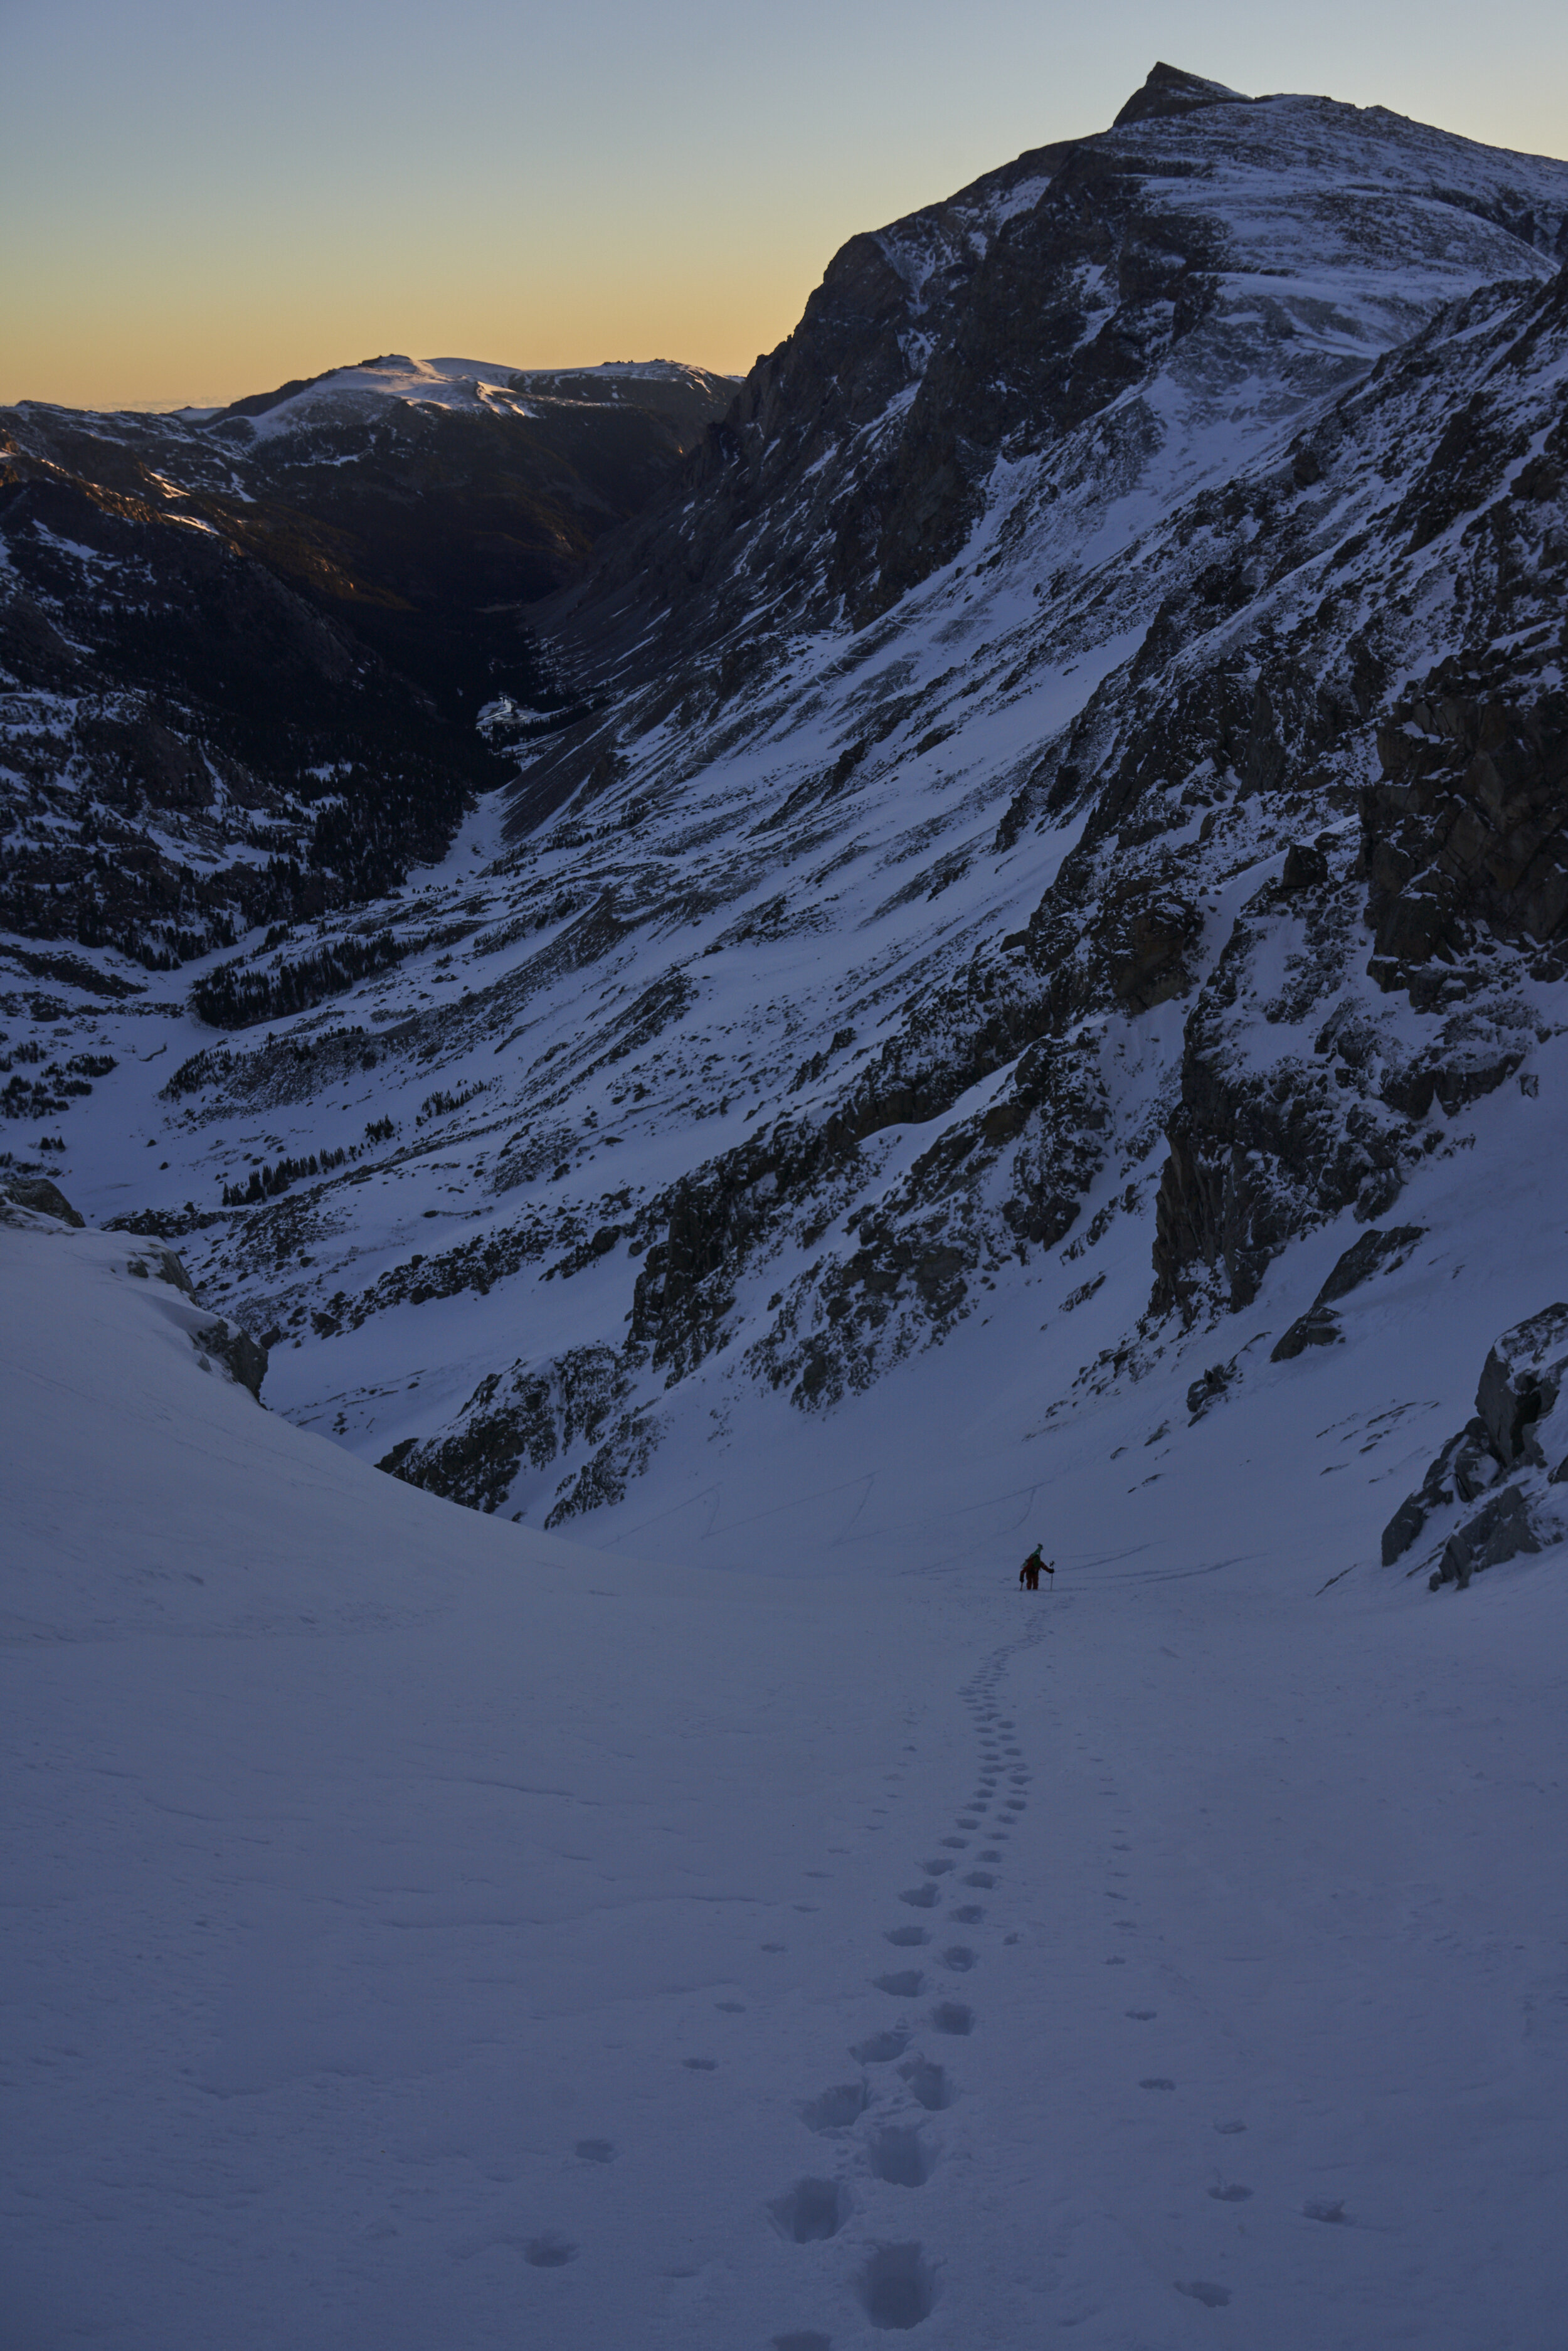 Booting up the North Couloir